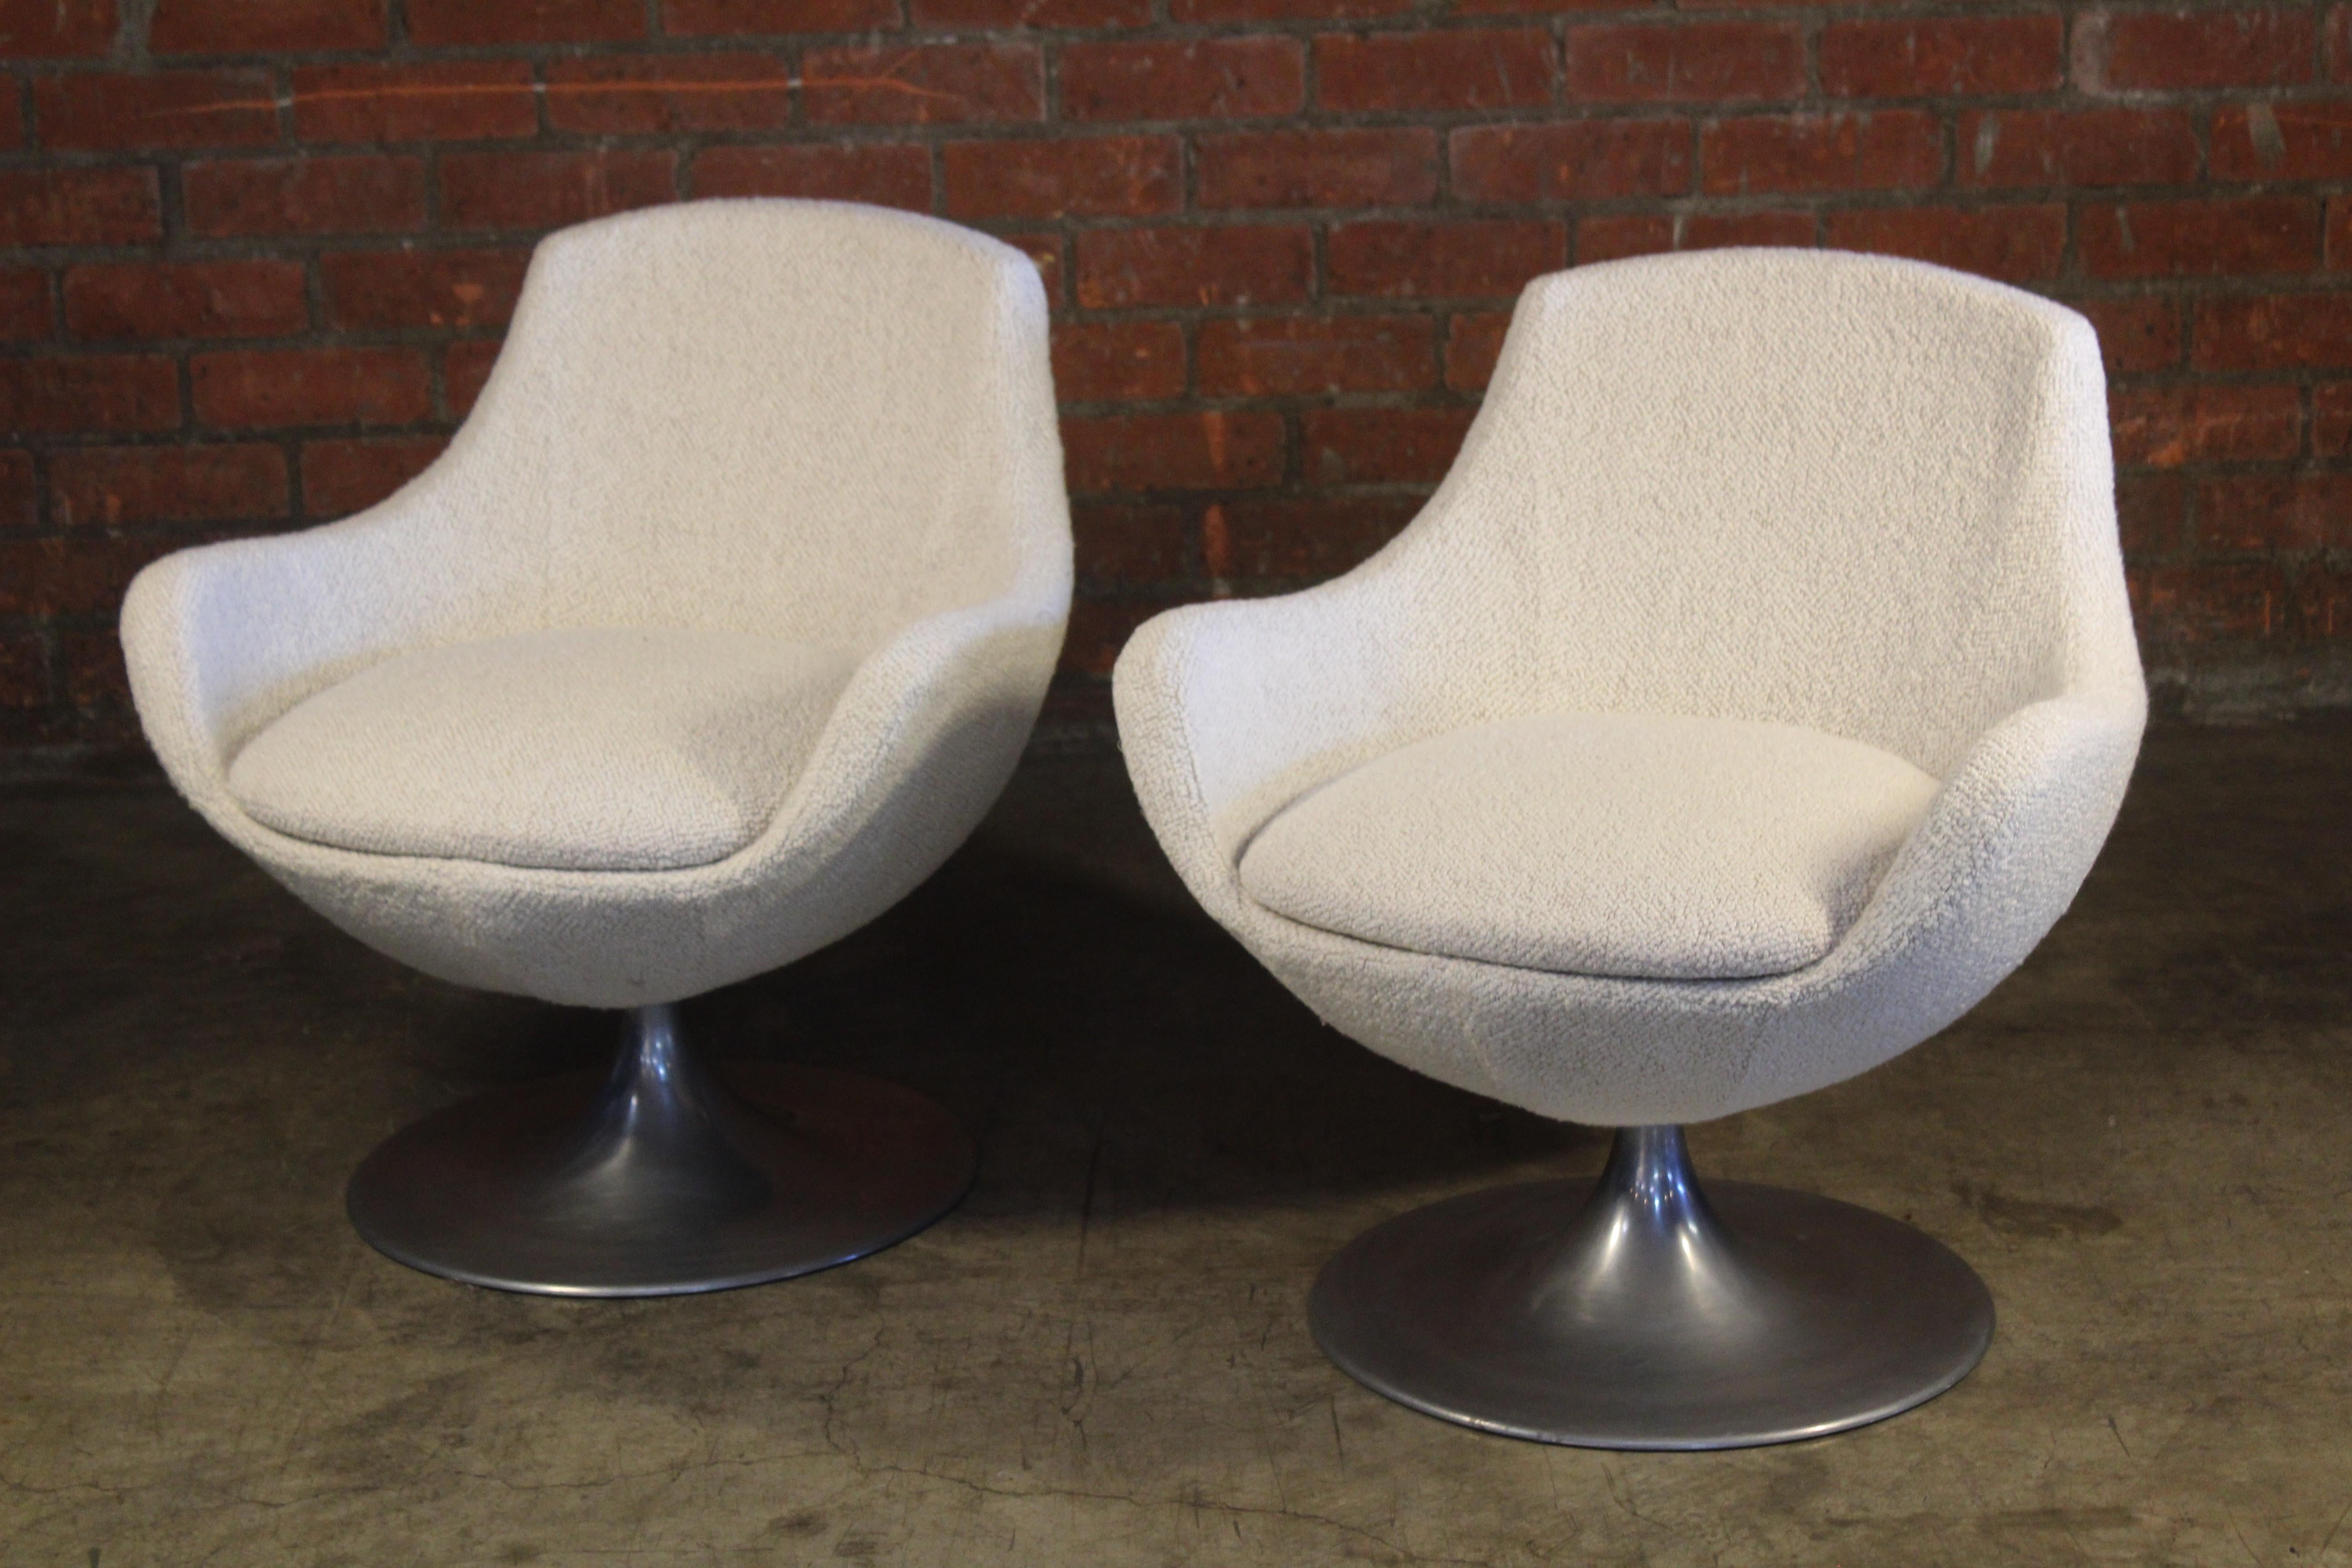 Pair of vintage 1960s swivel chairs, France. Newly upholstered in a white boucle. They sit on aluminum bases. Each chair is in good condition with only minimal wear to the base. Sold as a pair.